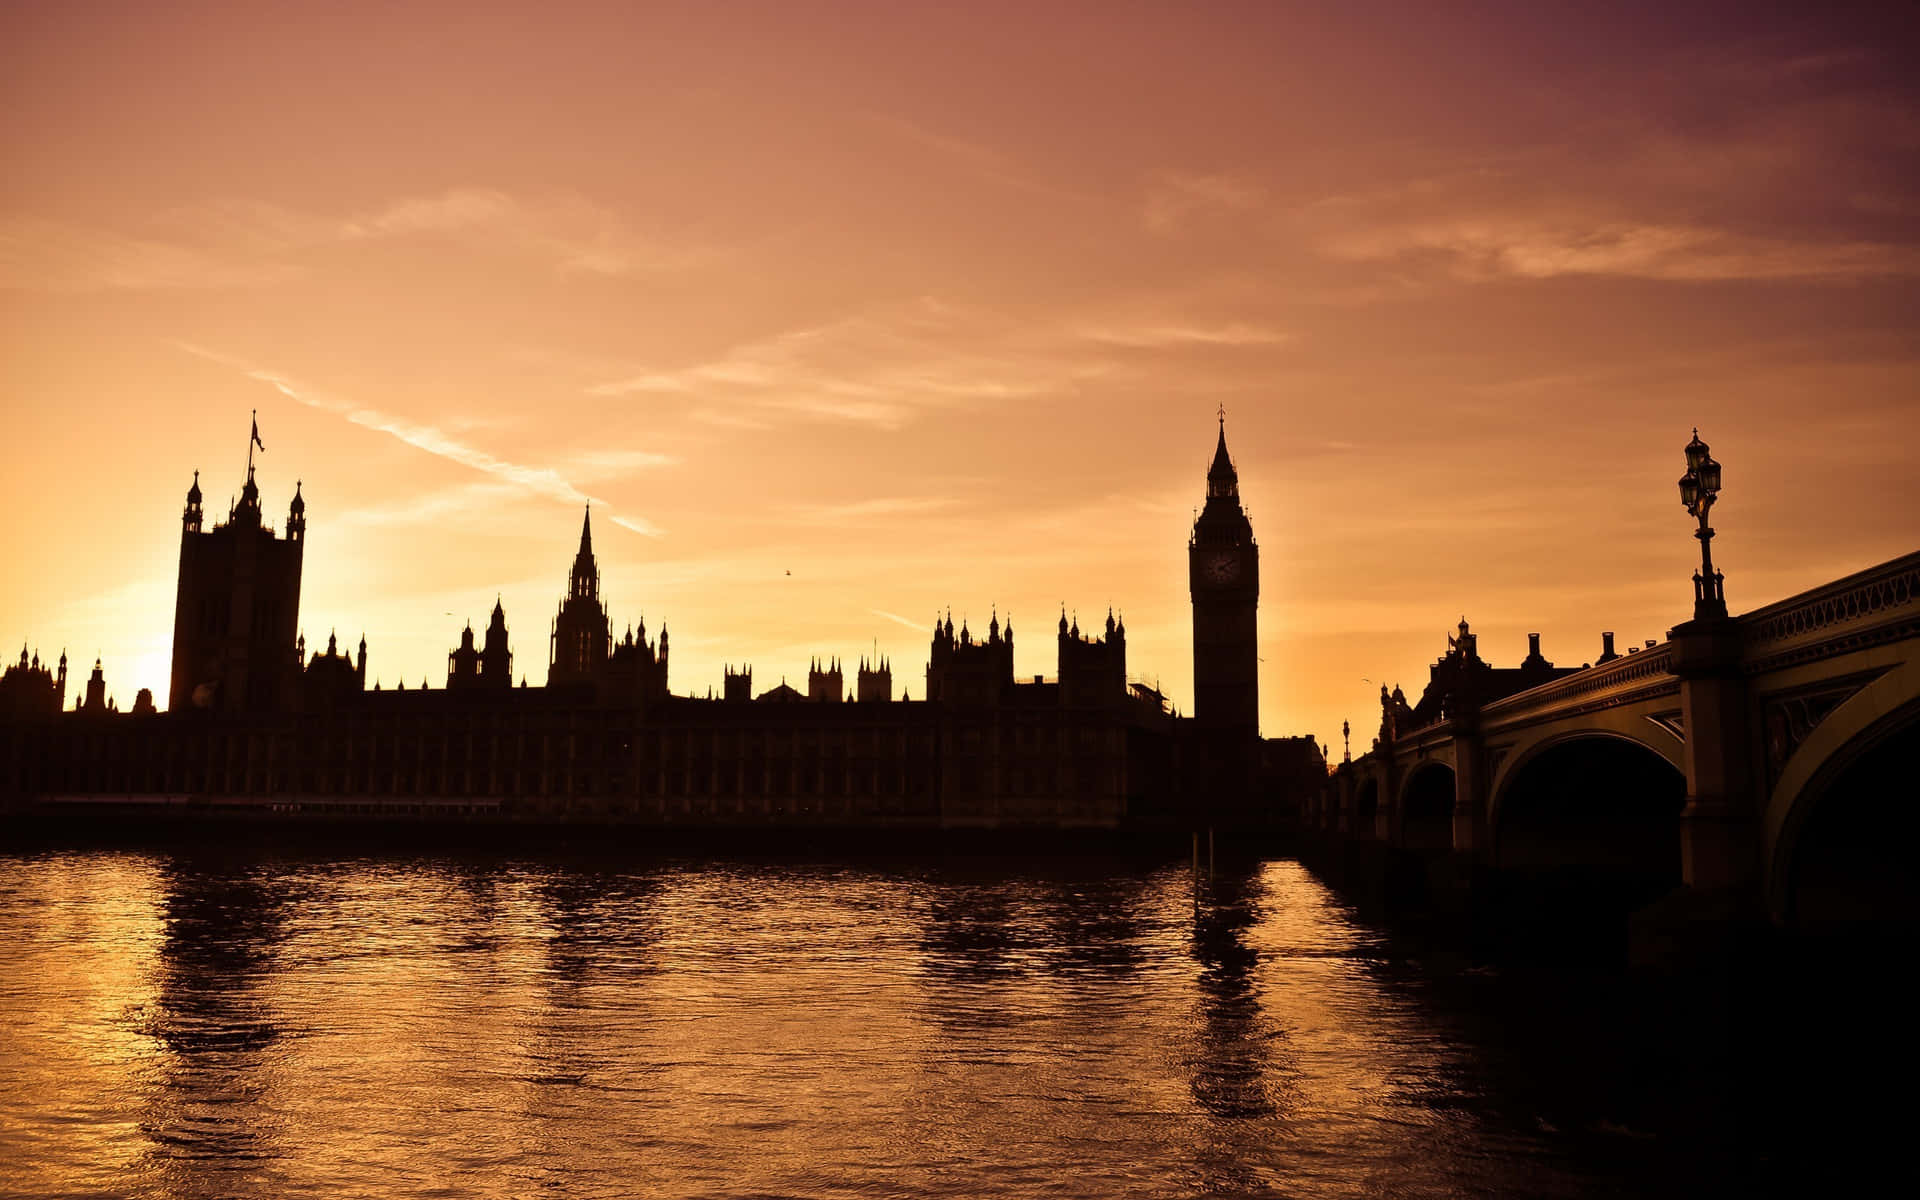 A sunset view of the iconic London skyline.